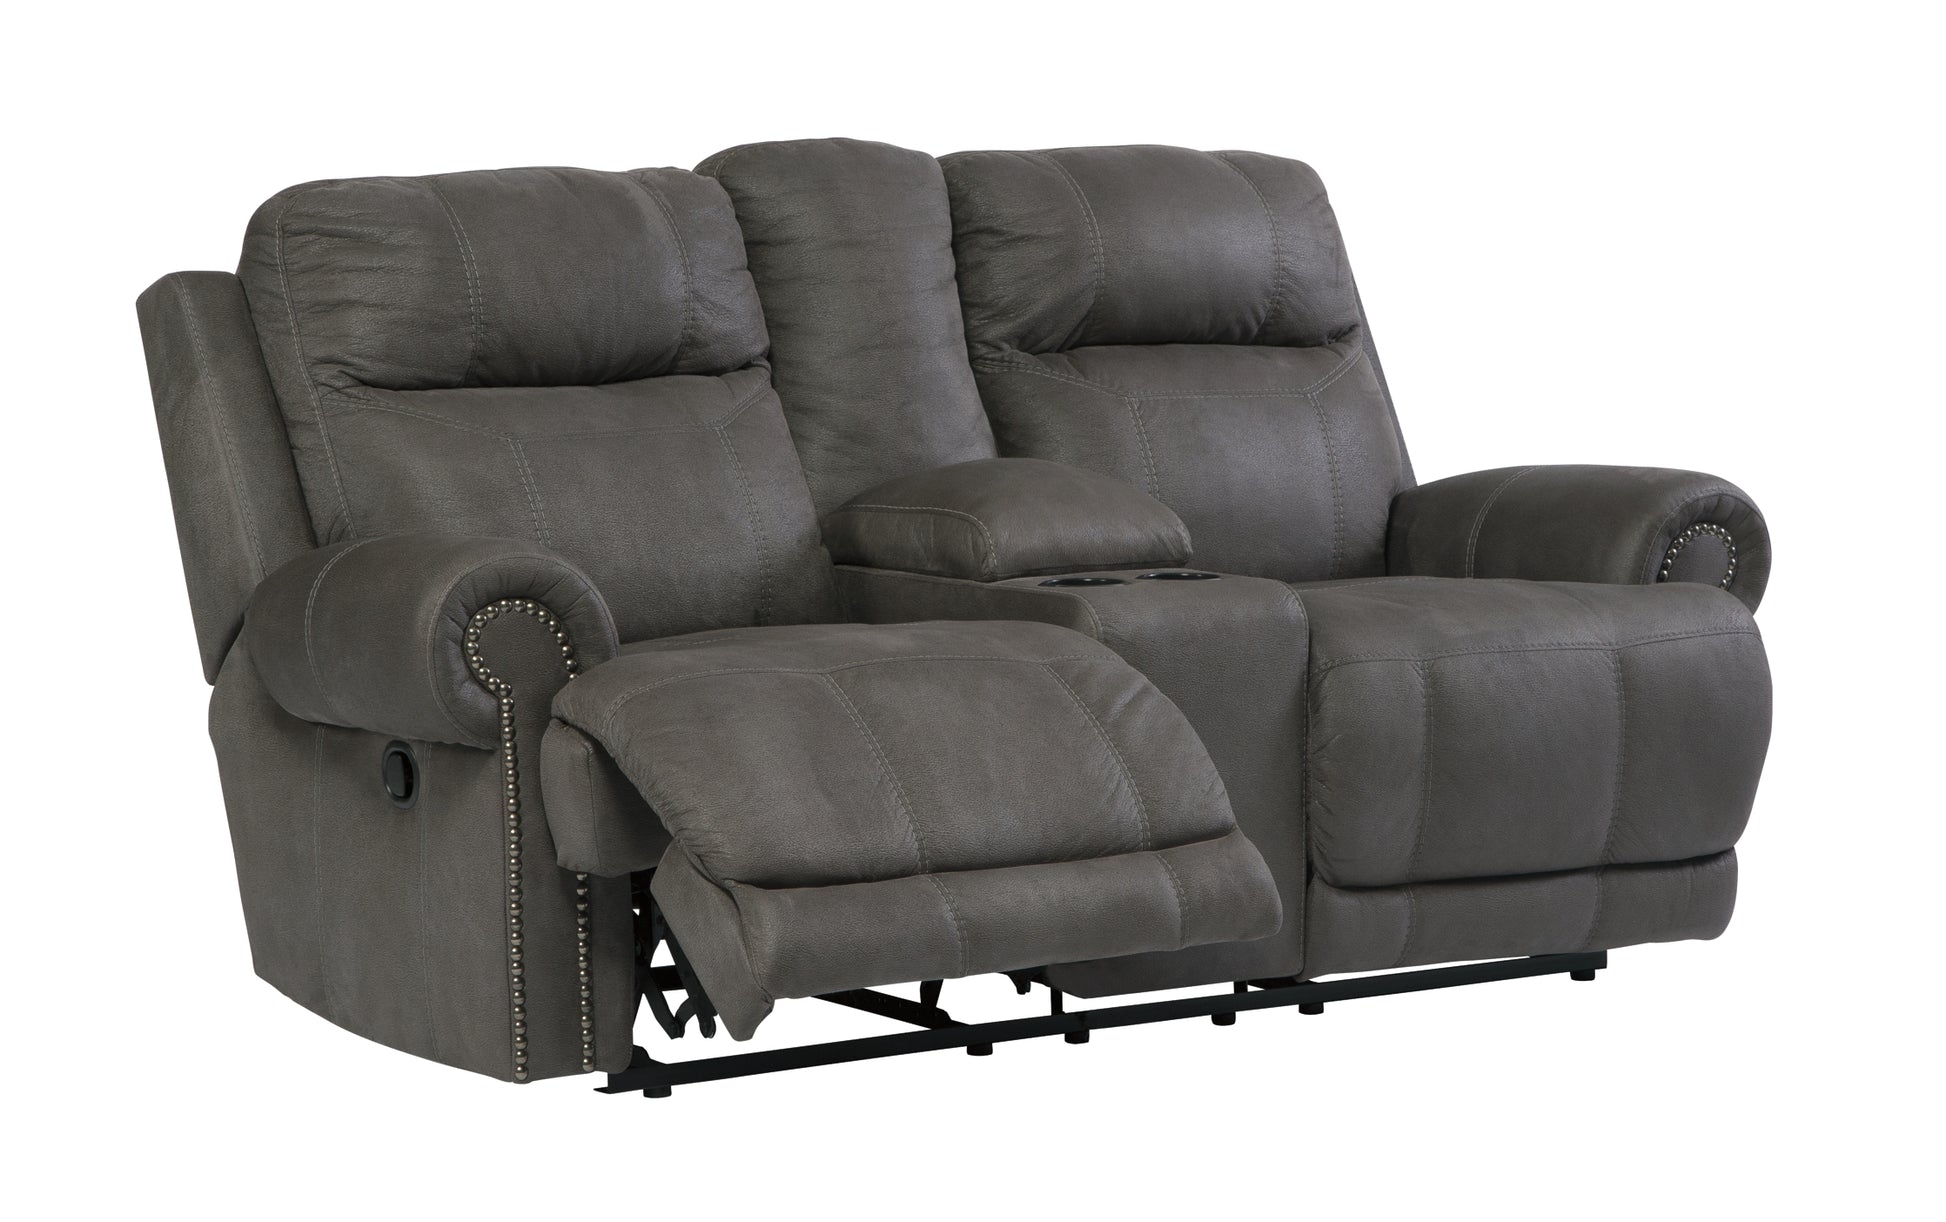 Austere Sofa, Loveseat and Recliner JB's Furniture  Home Furniture, Home Decor, Furniture Store